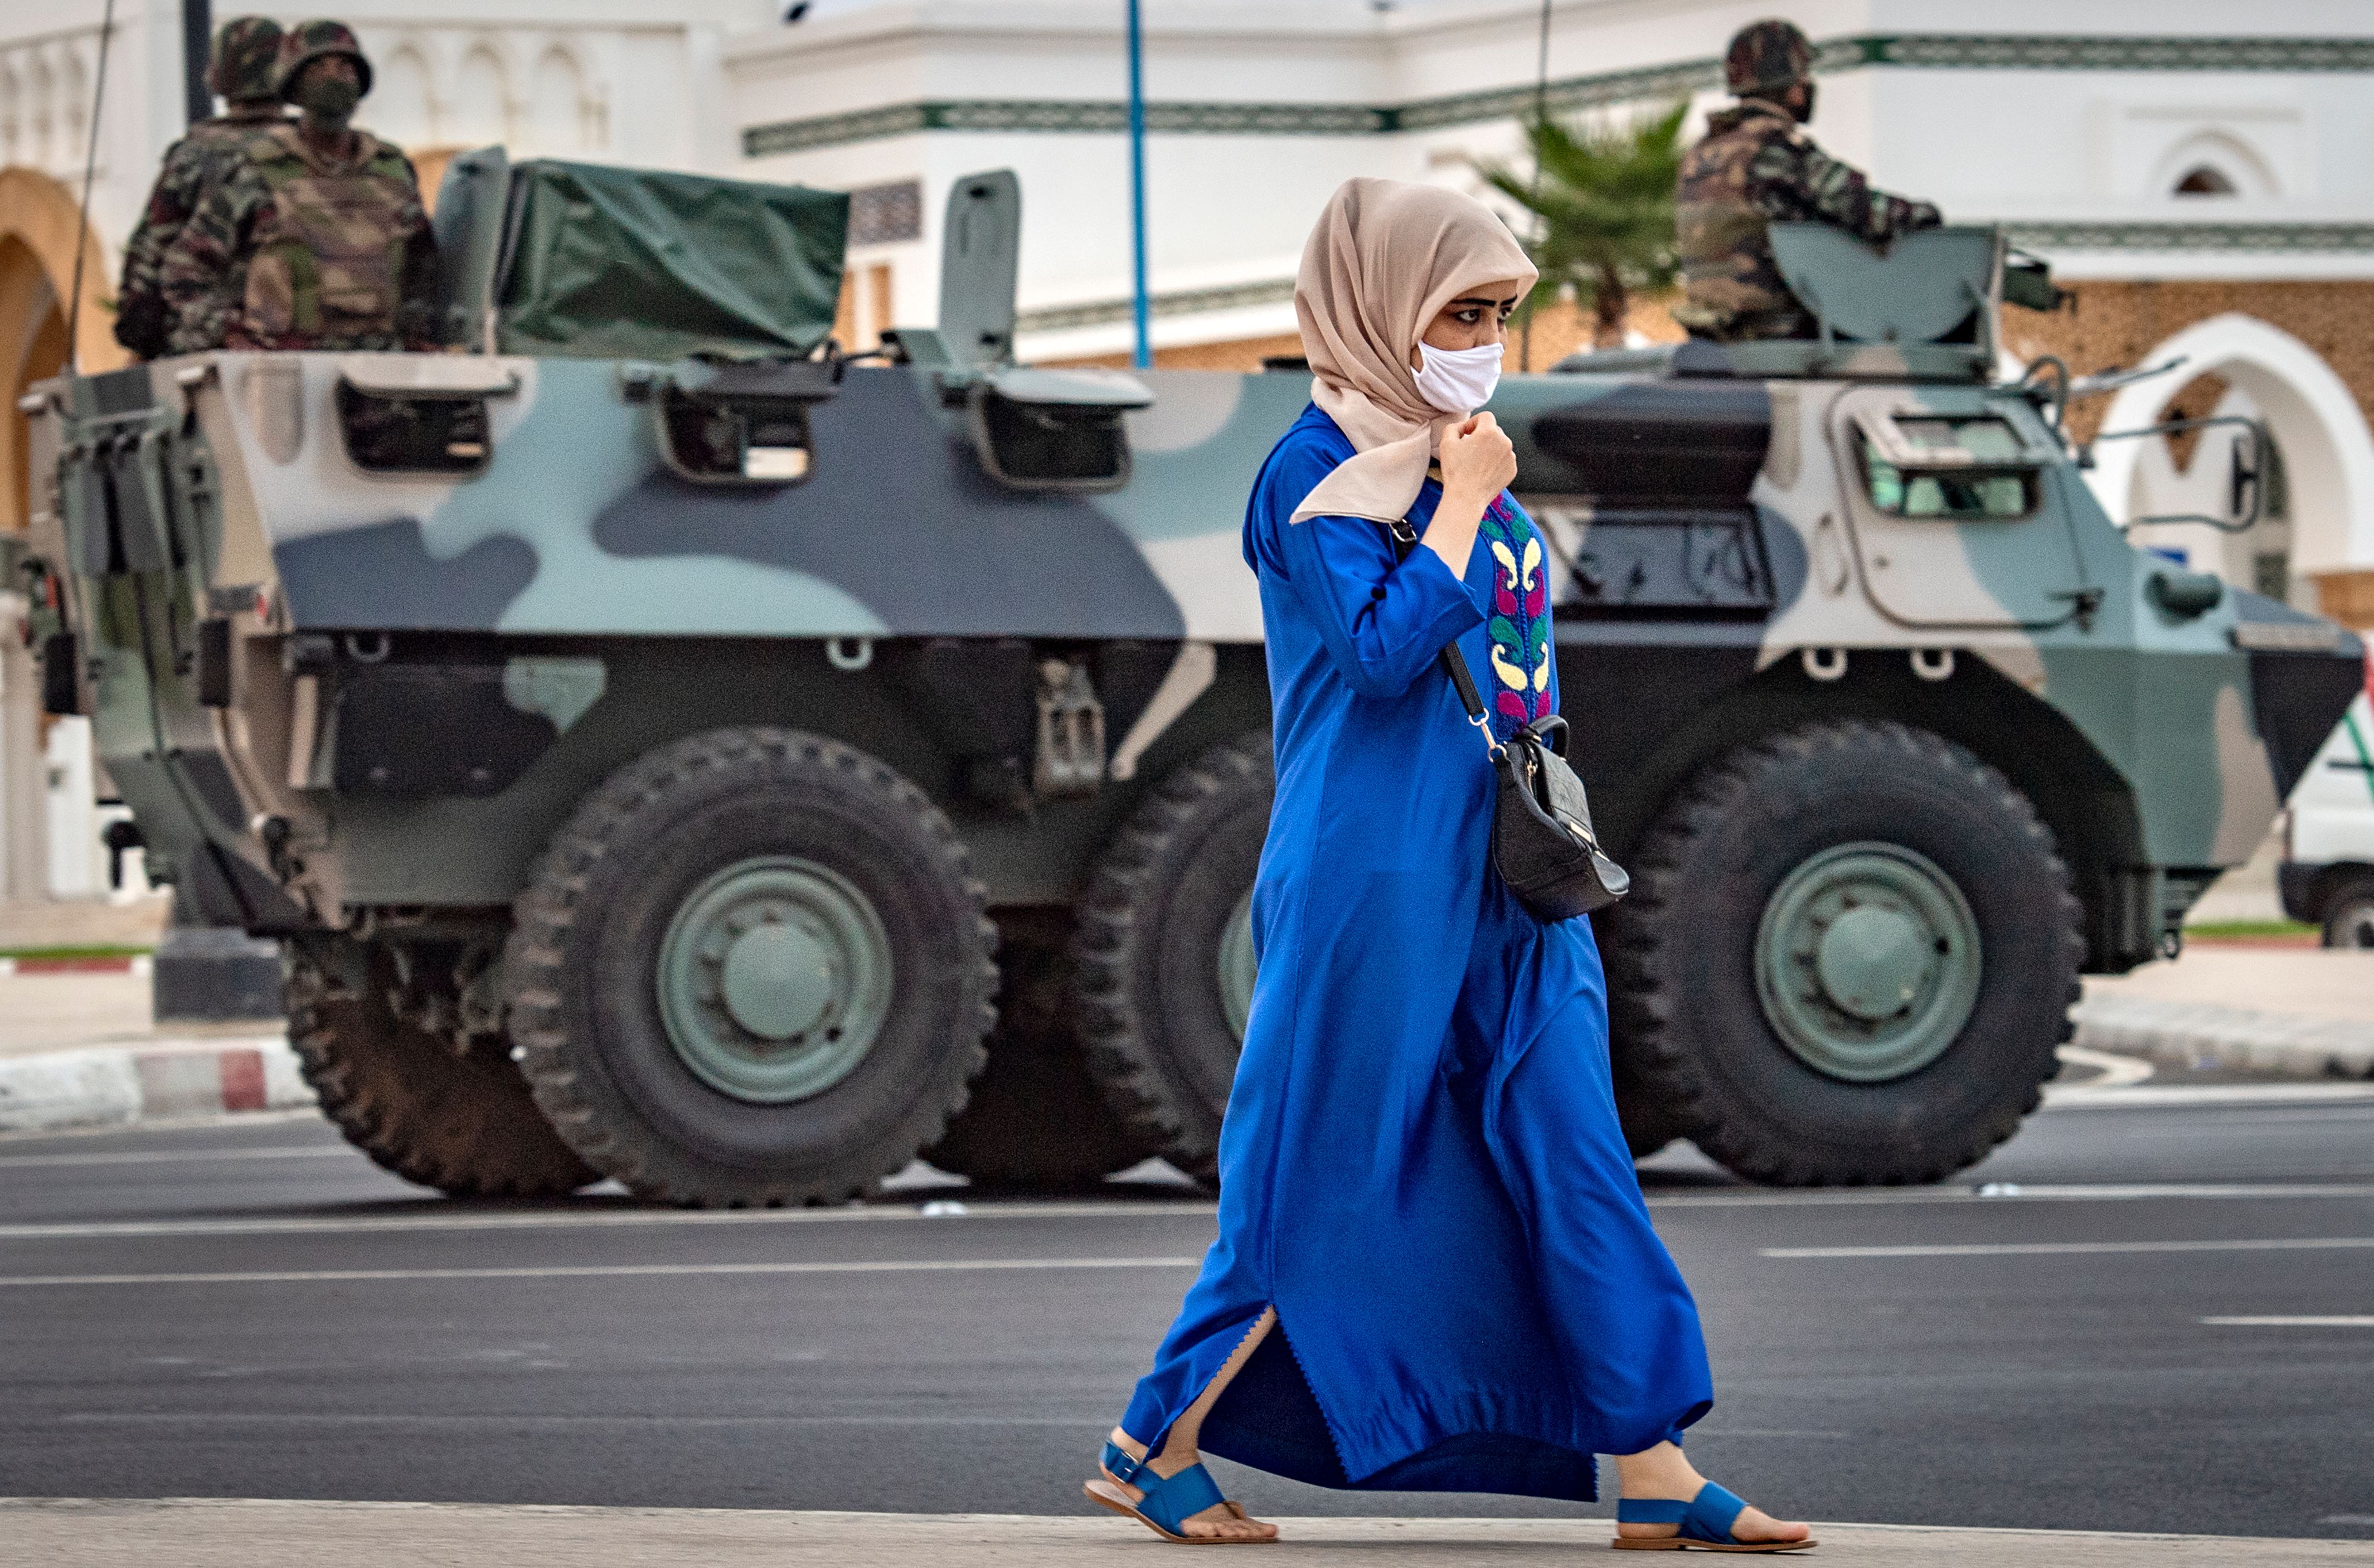 A woman walks past a tank and soldiers on a street in Tangier, Morocco, on 11 August 2020  (photo: FADEL SENNA/AFP)